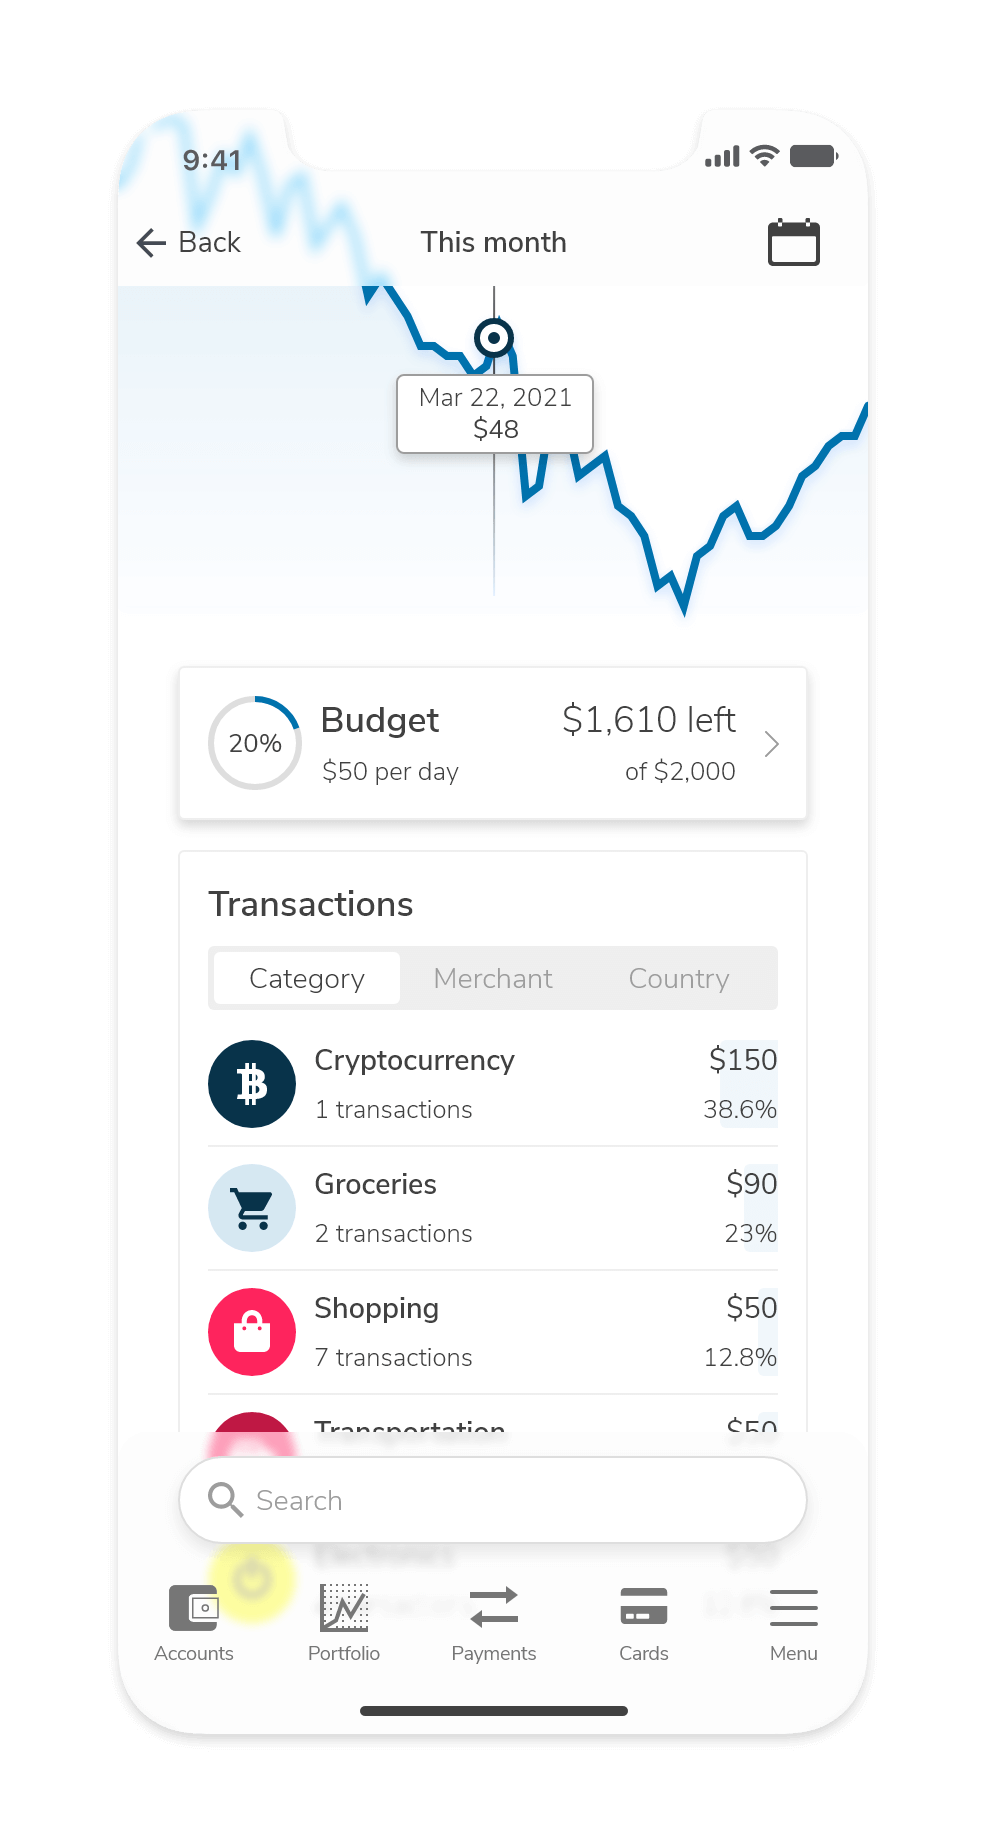 Screenshots of the transaction history page sorted by Category, users can also arrange transactions by country, or merchant